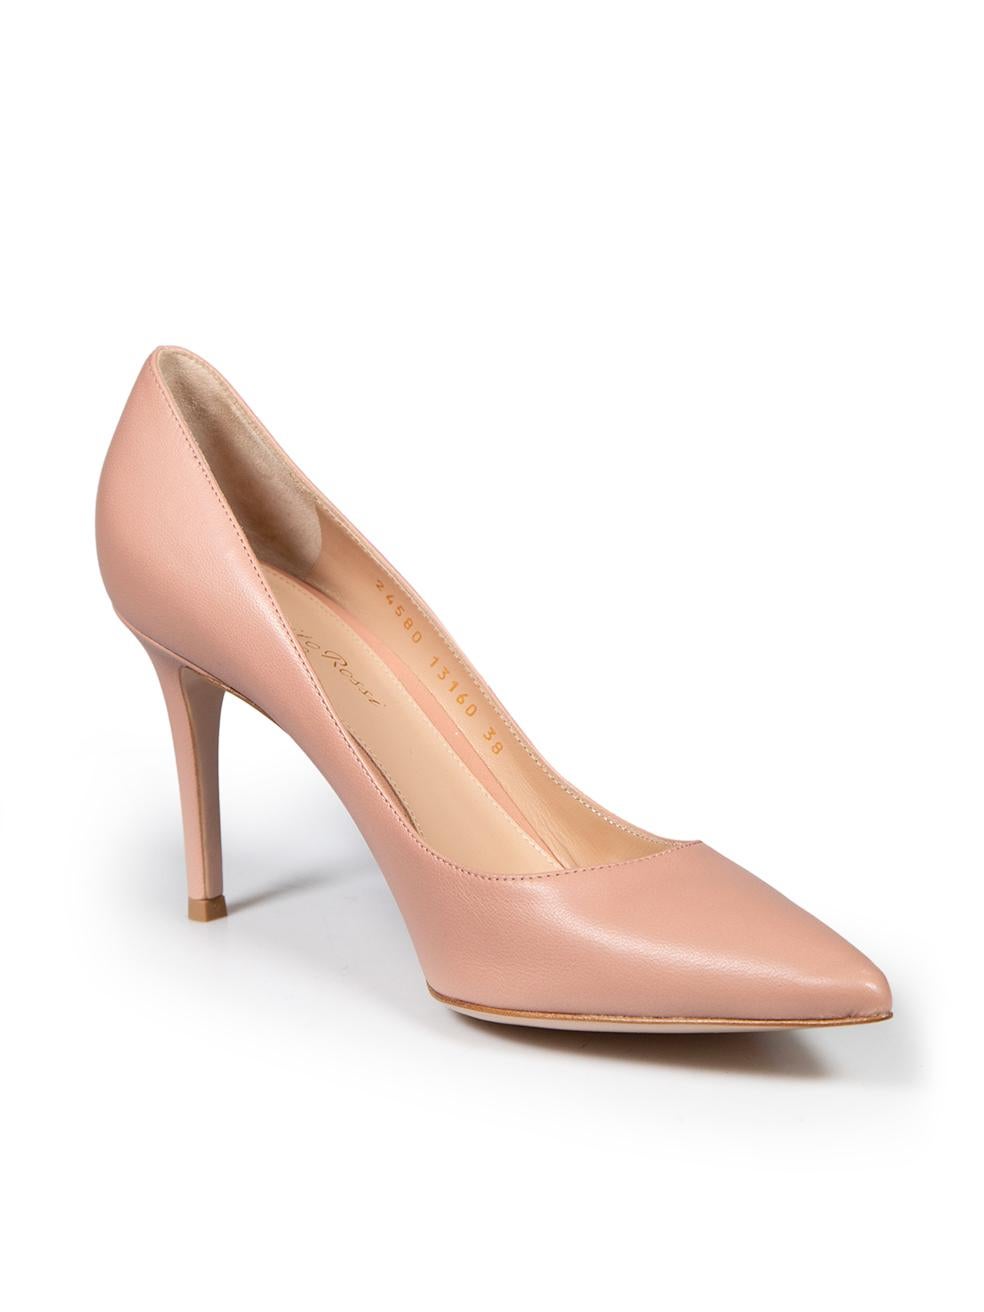 CONDITION is Very good. Minimal wear to shoes is evident. Minimal scratches on both heels and a indent on the front of the left shoe. Marks seen on the sides of both shoes on this used Gianvito Rossi designer resale item.
 
 
 
 Details
 
 
 Nude